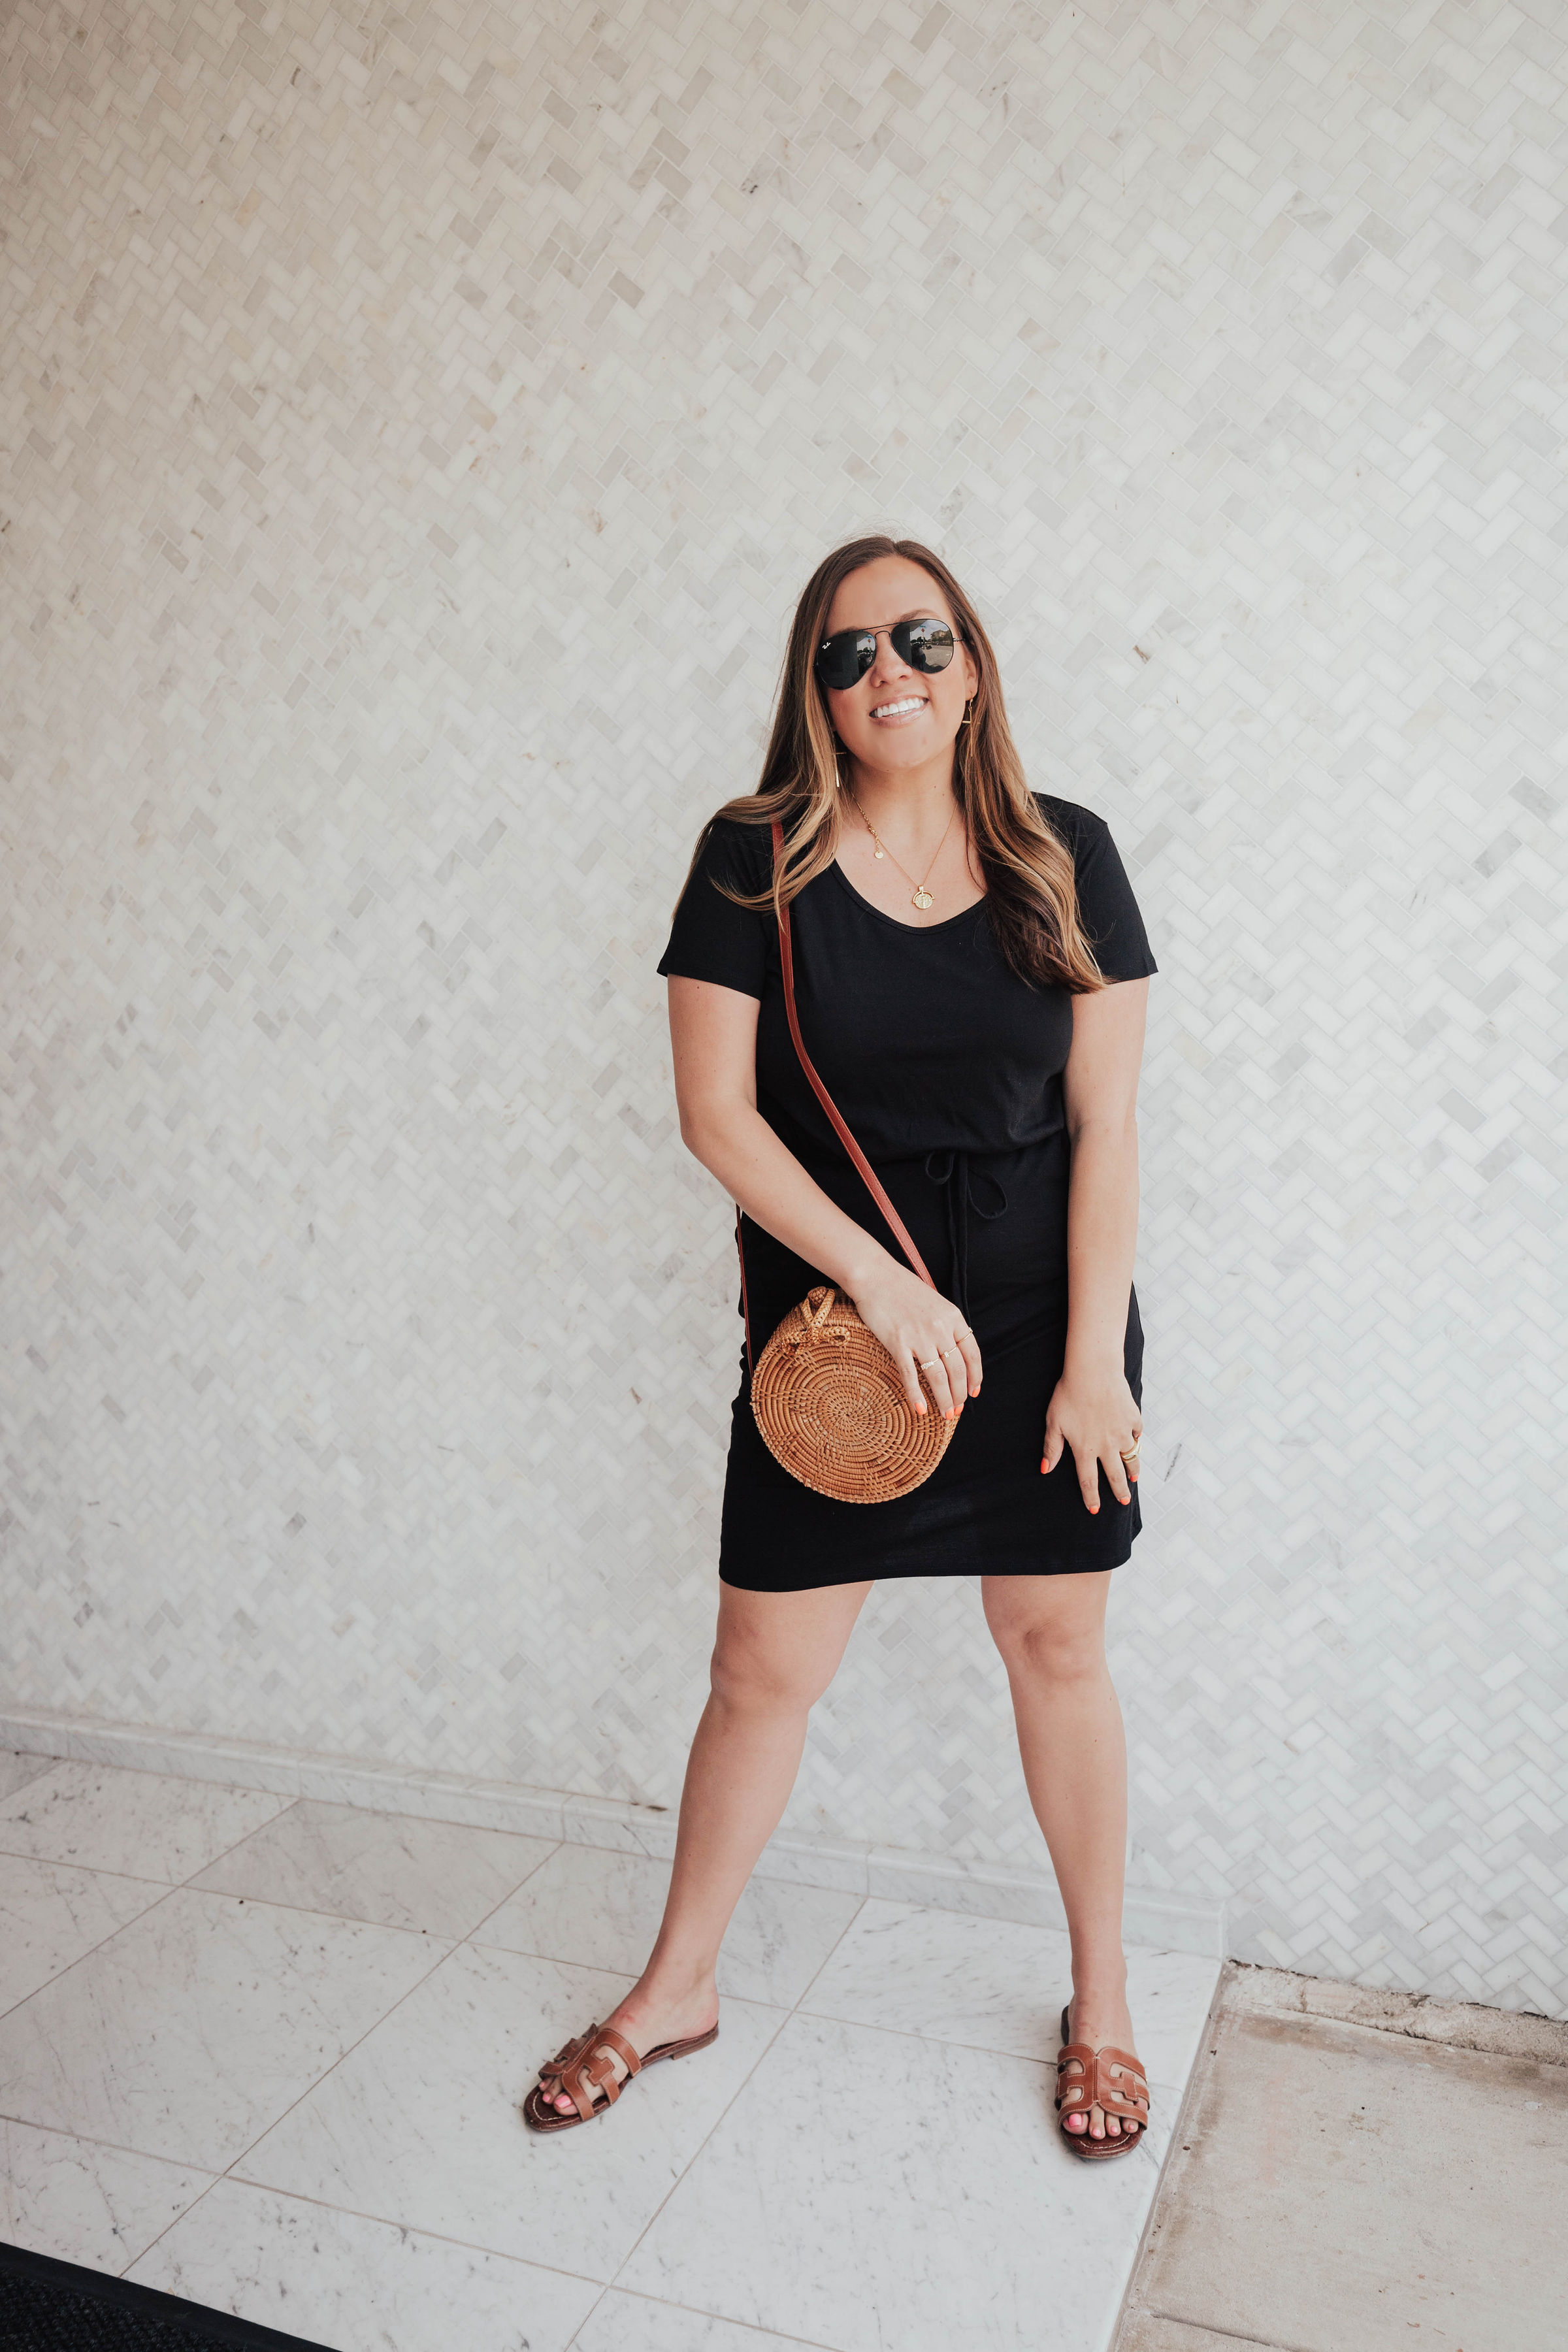 San Francisco Blogger, Ashley Zeal from Two Peas in a Prada shares an everyday black dress from Zappos! She is wearing the organic brand, PACT! 